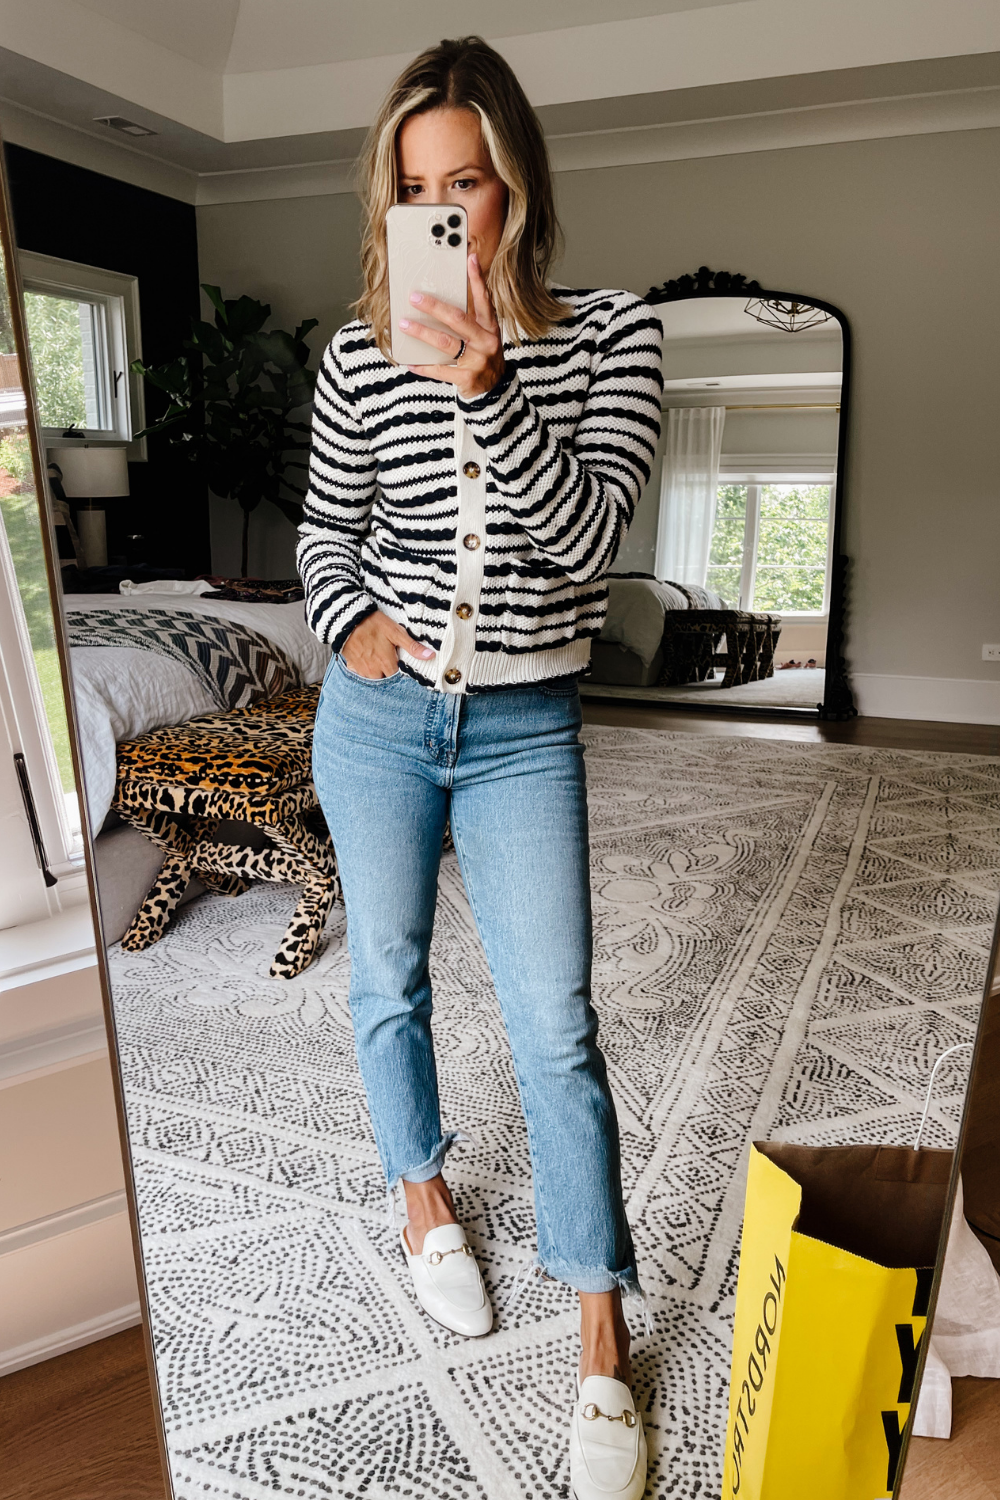 Suzanne wearing a braid stripe cardigan, vintage jeans, and mules